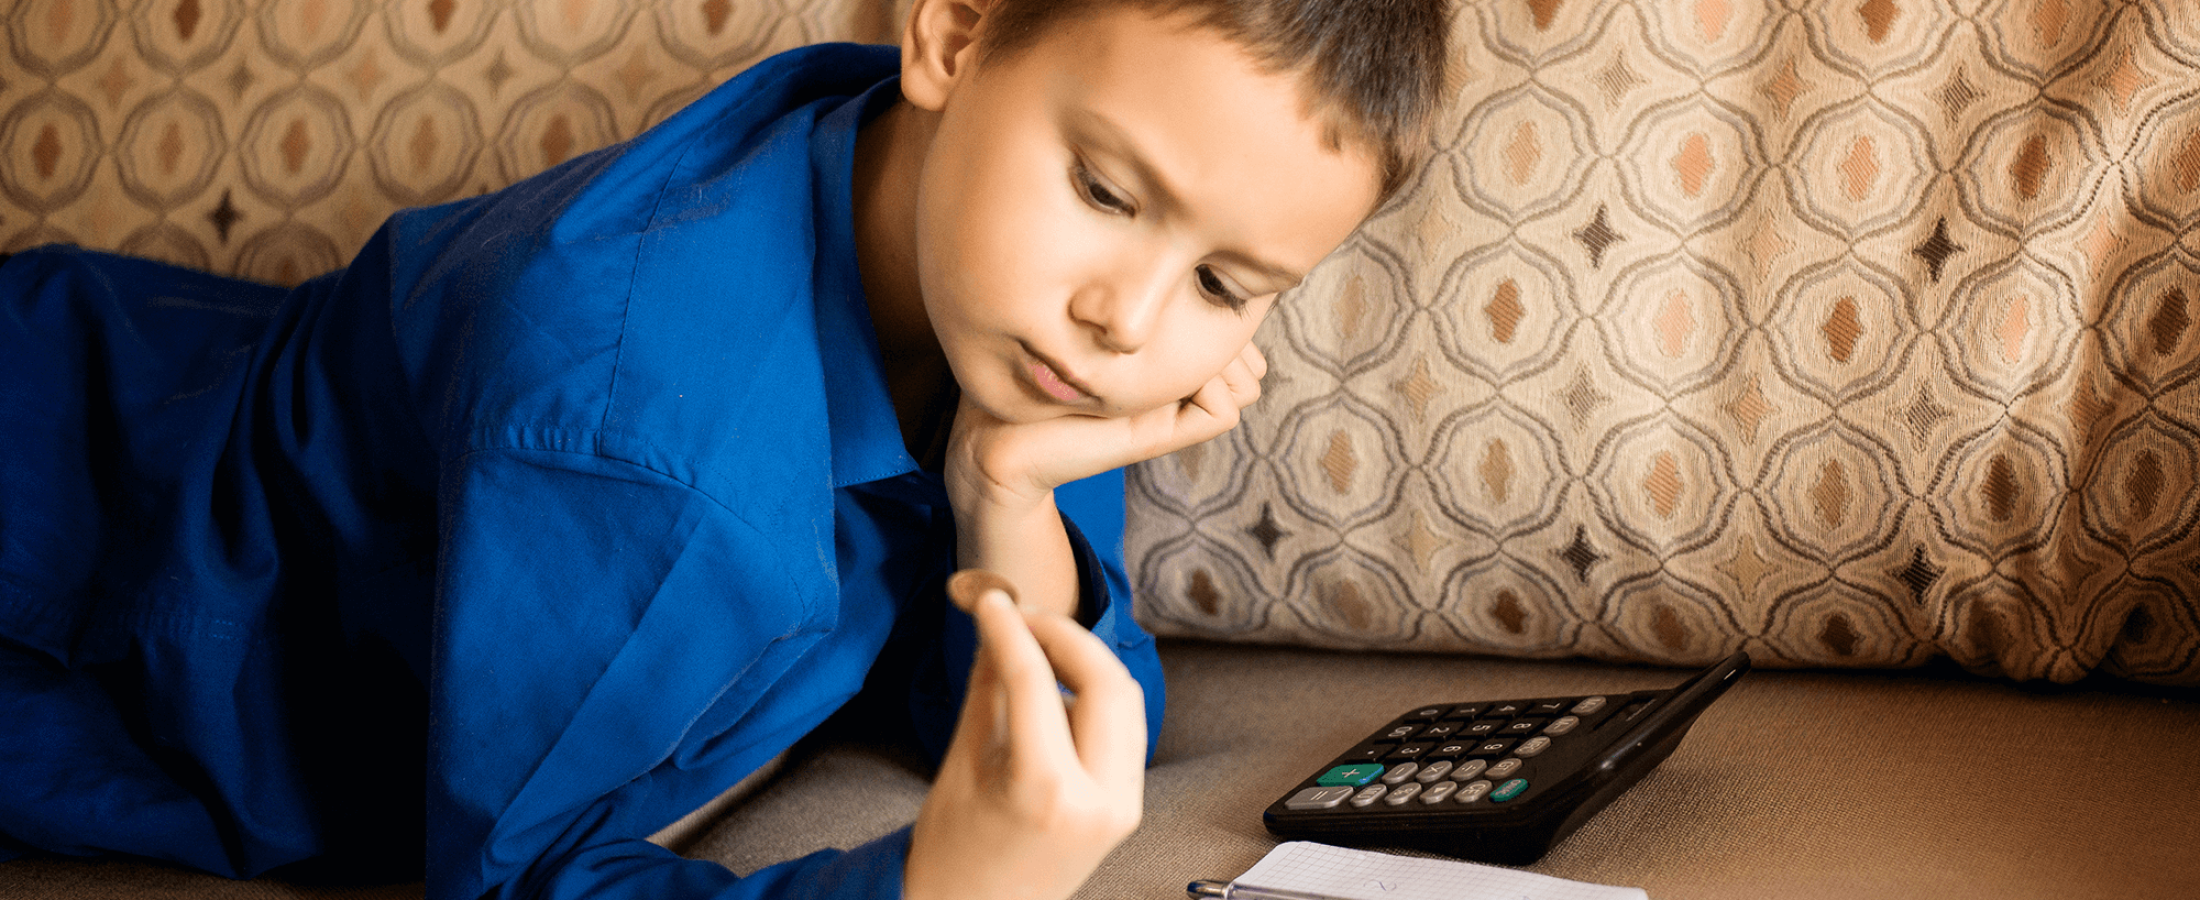 Start Your Child's Financial Education Early: Tips for Teaching Your Children the Basics of Money Management